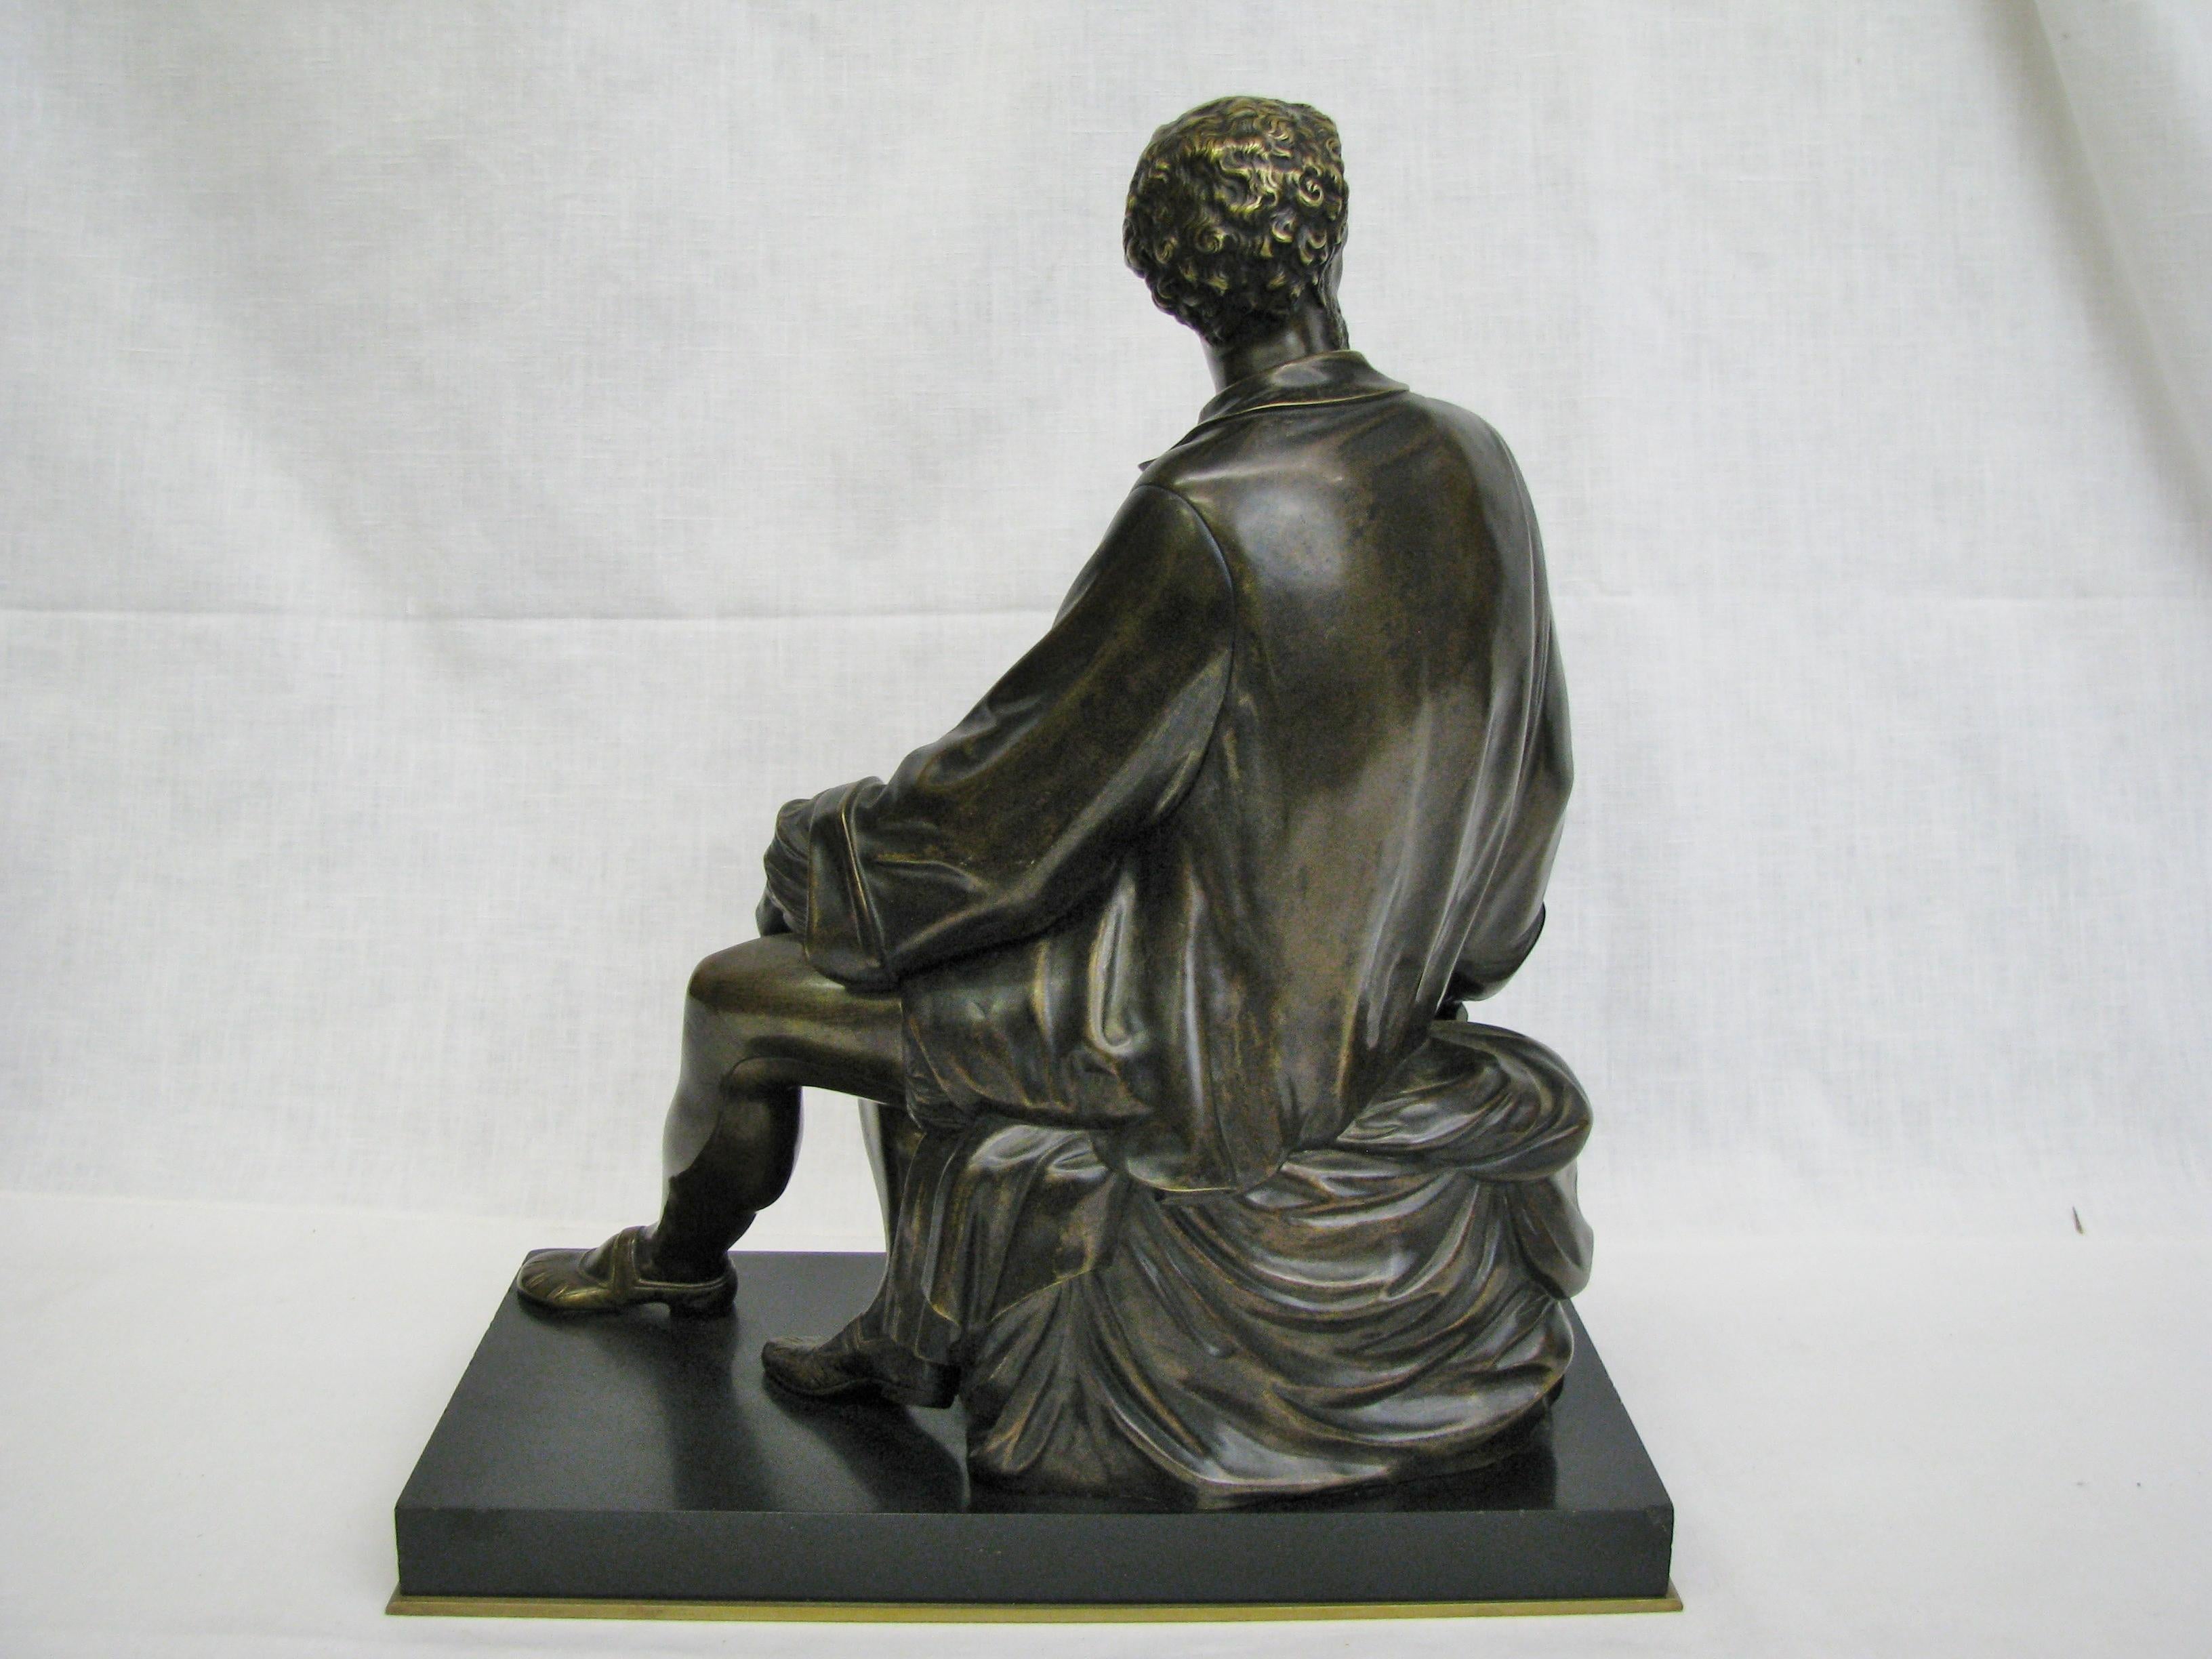 Beautifully modeled late 19th century cast bronze figure of a seated sculptor in Renaissance dress. Holding a hammer in his right hand and his chisel in his left. A sample of his work, an oval cartouche featuring putti rests at his side. Wonderfully